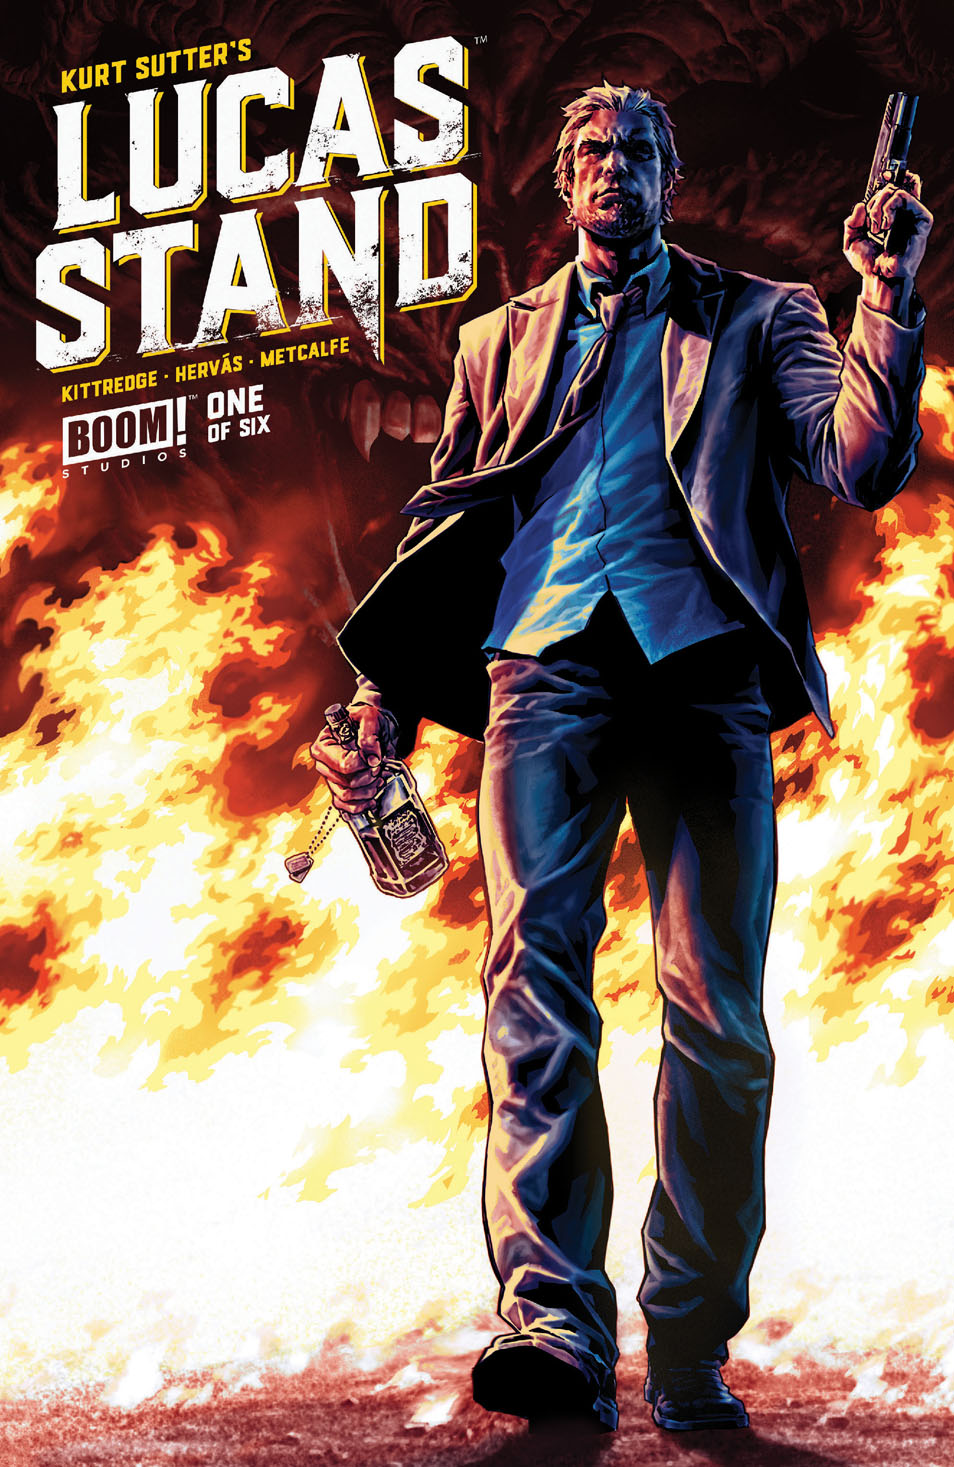 This image is the cover for the book Lucas Stand #1, Lucas Stand